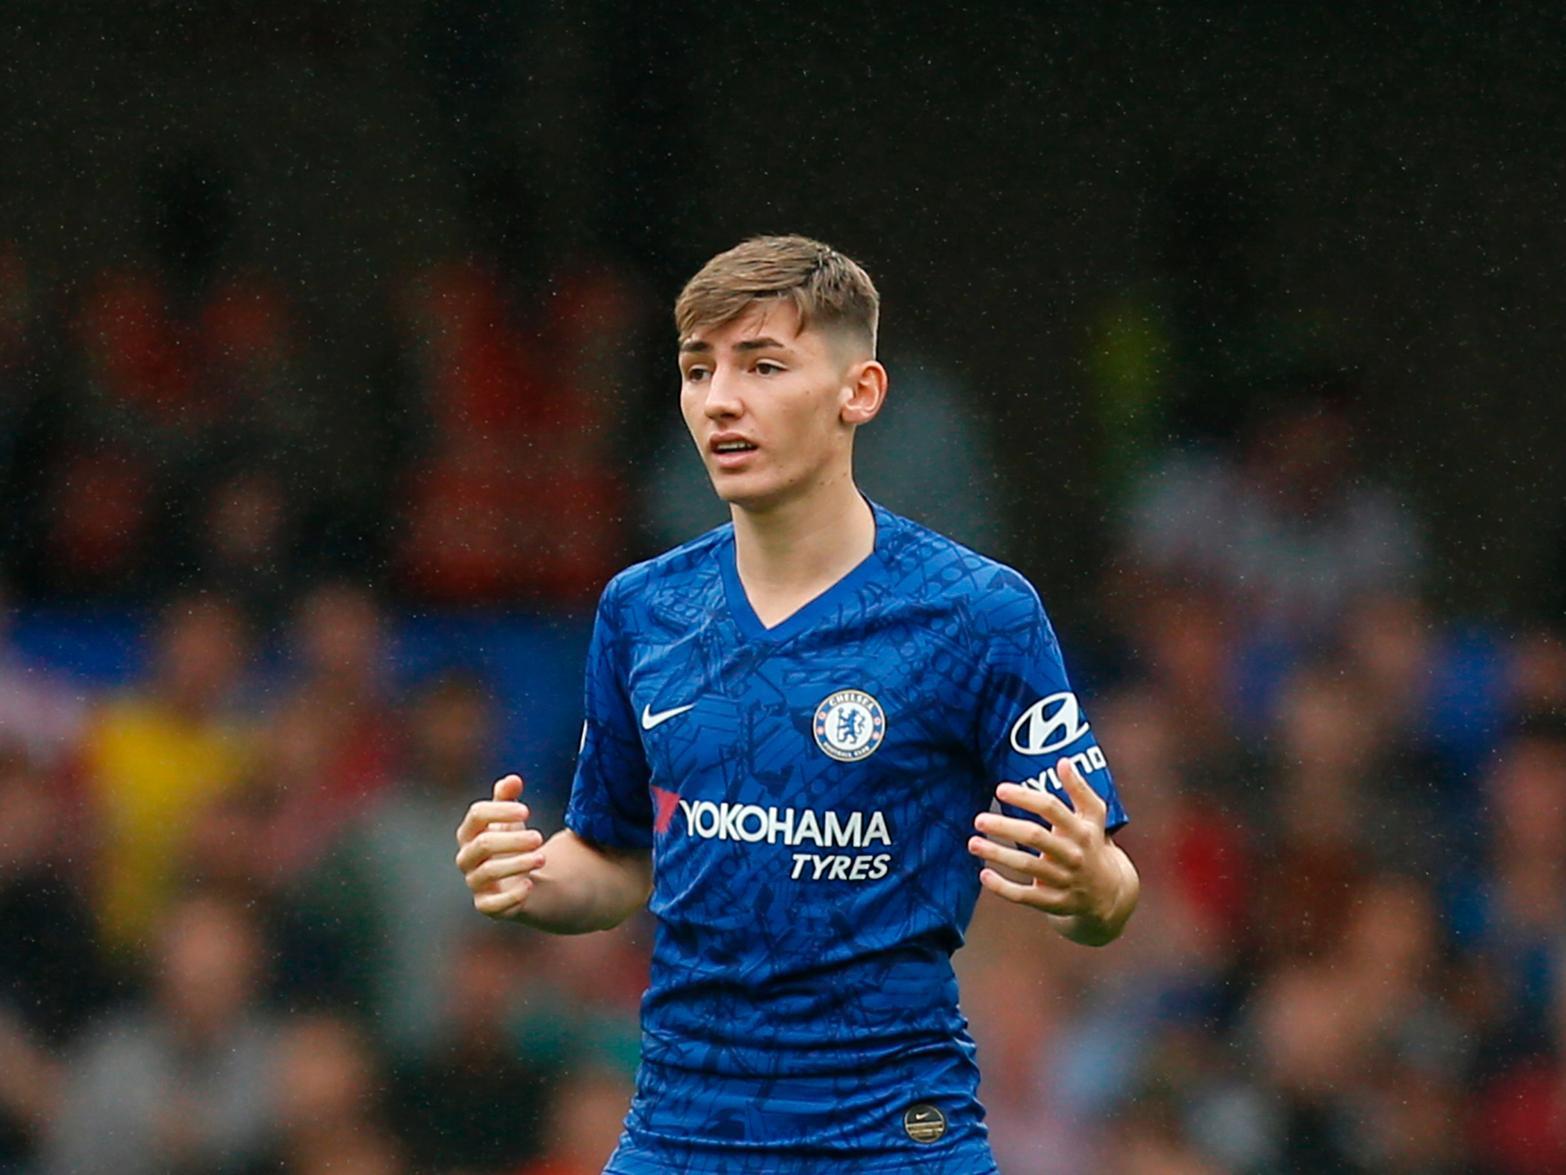 Struggling to get game time under Frank Lampard, Billy Gilmour has been linked with both Leeds United and Nottingham Forest ahead of the January window. Any transfer would be a loan for the highly-rated youngster, who is said to be a creative playmaker. Creativity is an area Leeds struggle with when Pablo Hernandez is out of the team - another option could boost Leeds' firepower.